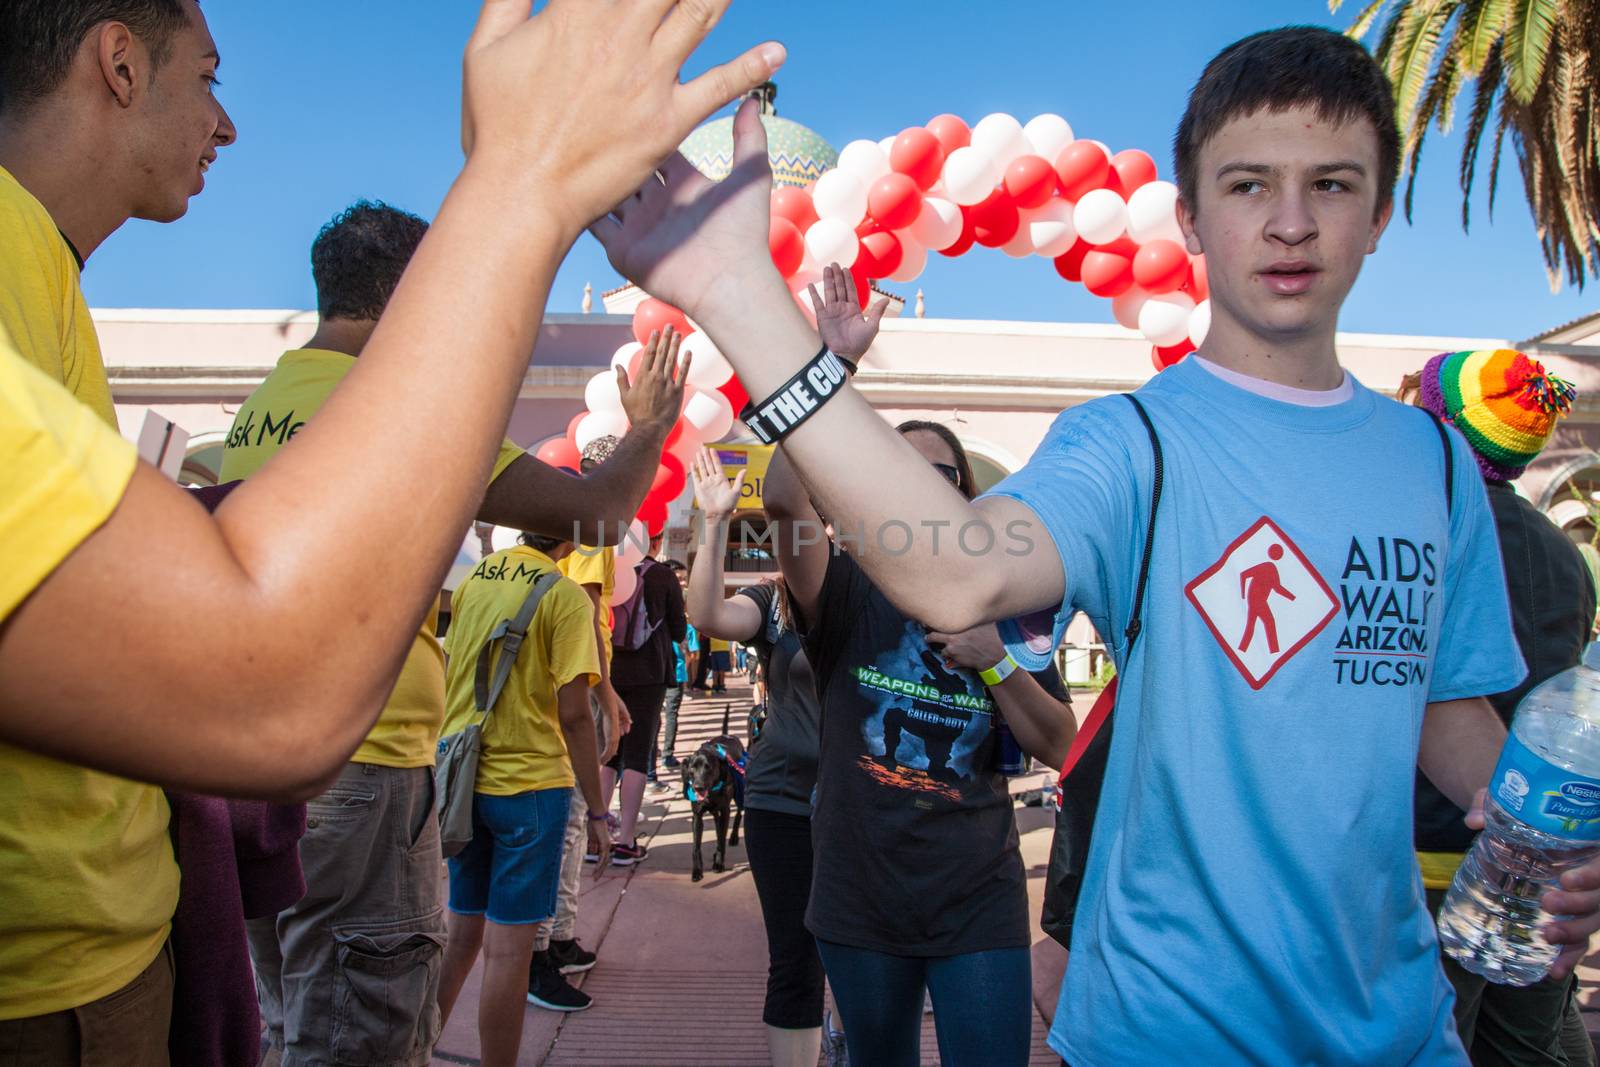 TUCSON, AZ/USA - OCTOBER 12:  Unidentified young man slapping hands on October 12, 2014 in Tucson, Arizona, USA.